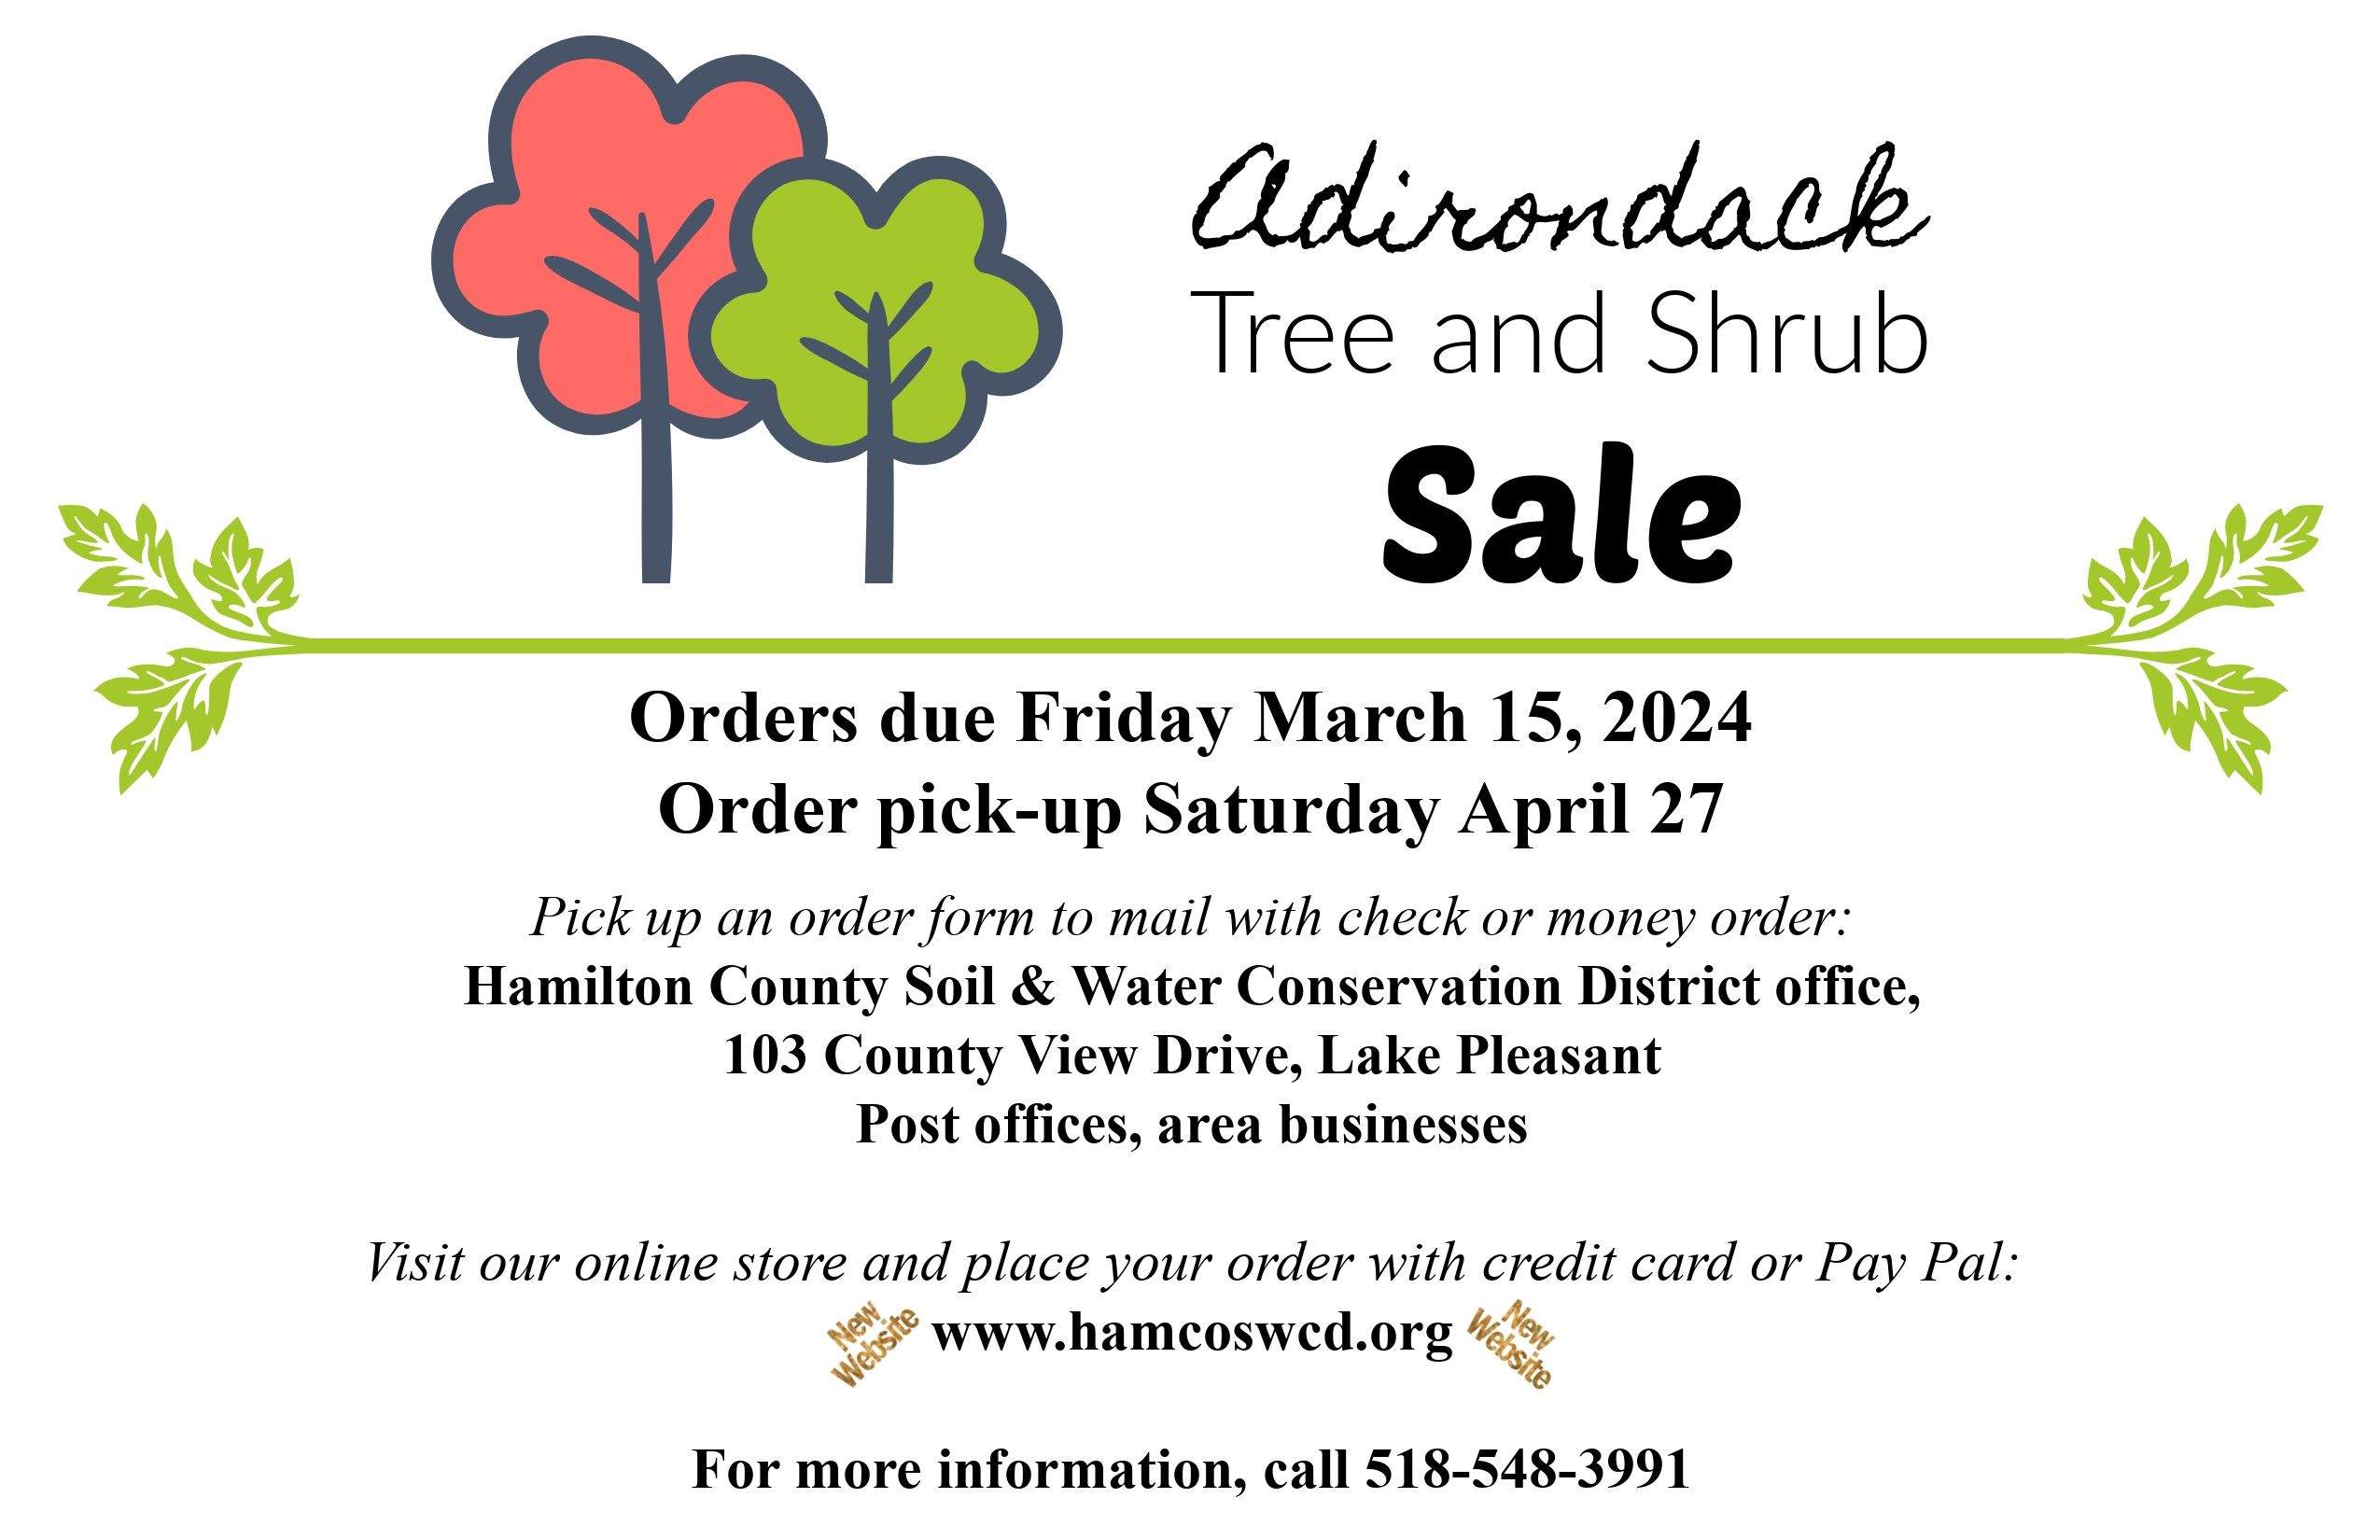 Order Trees and Shrubs from Hamilton County